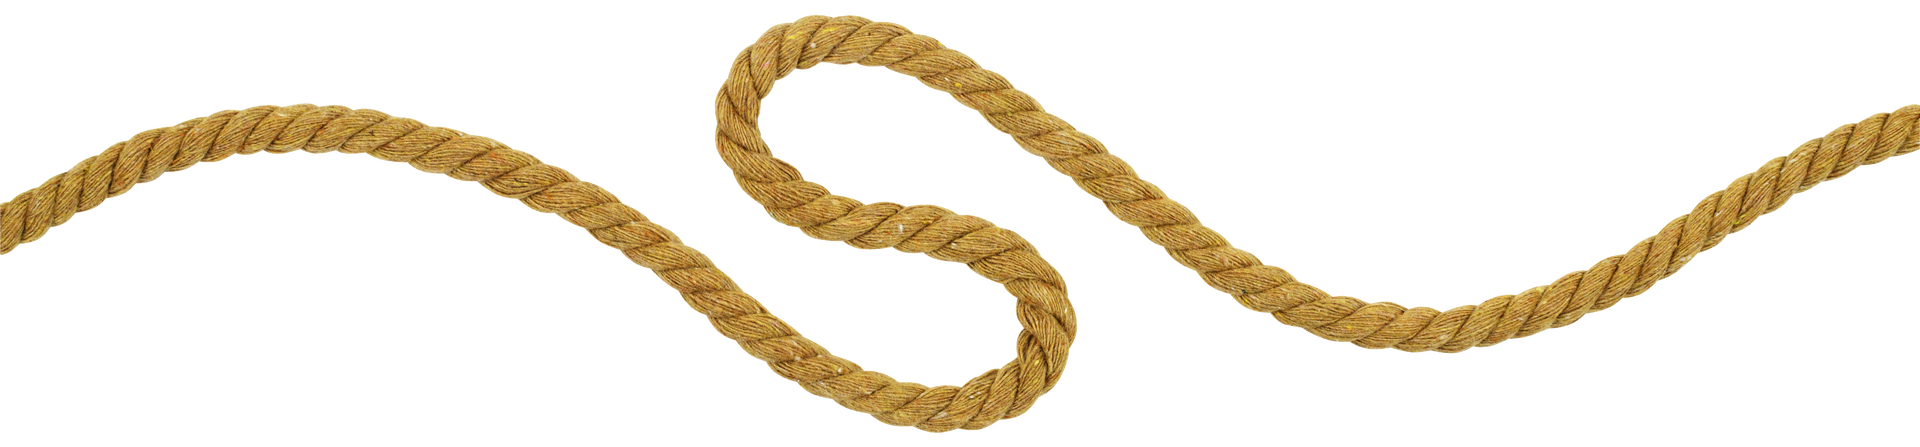 A close up of a rope on a white background.